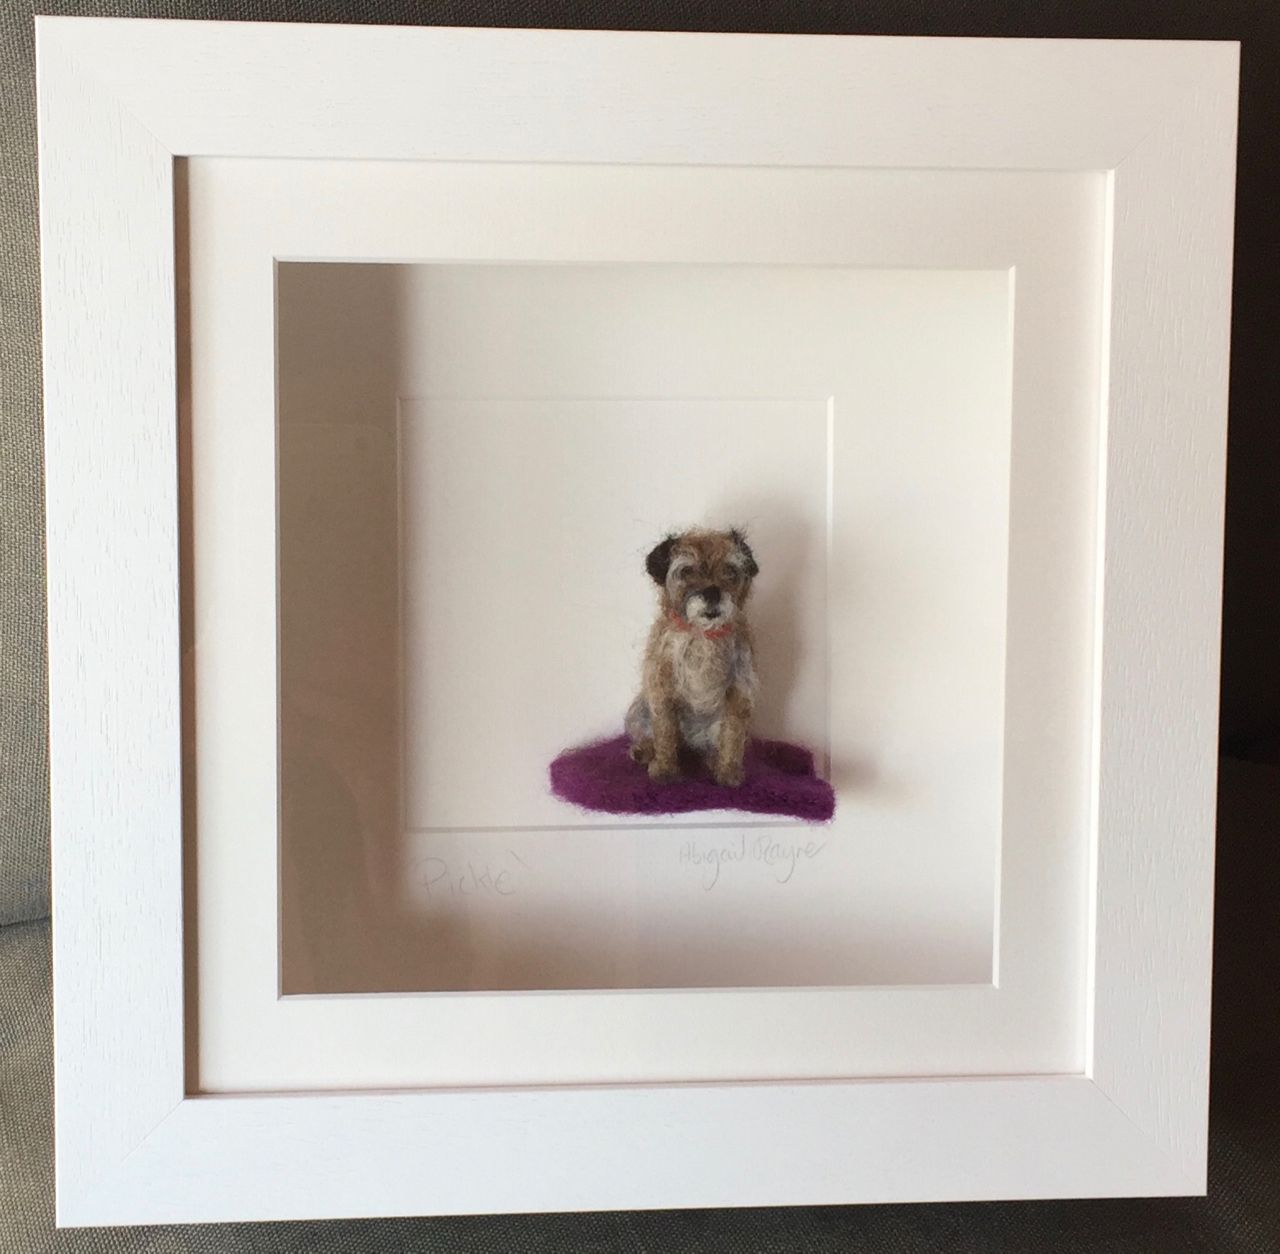 Framed Commission example 'Pickle'